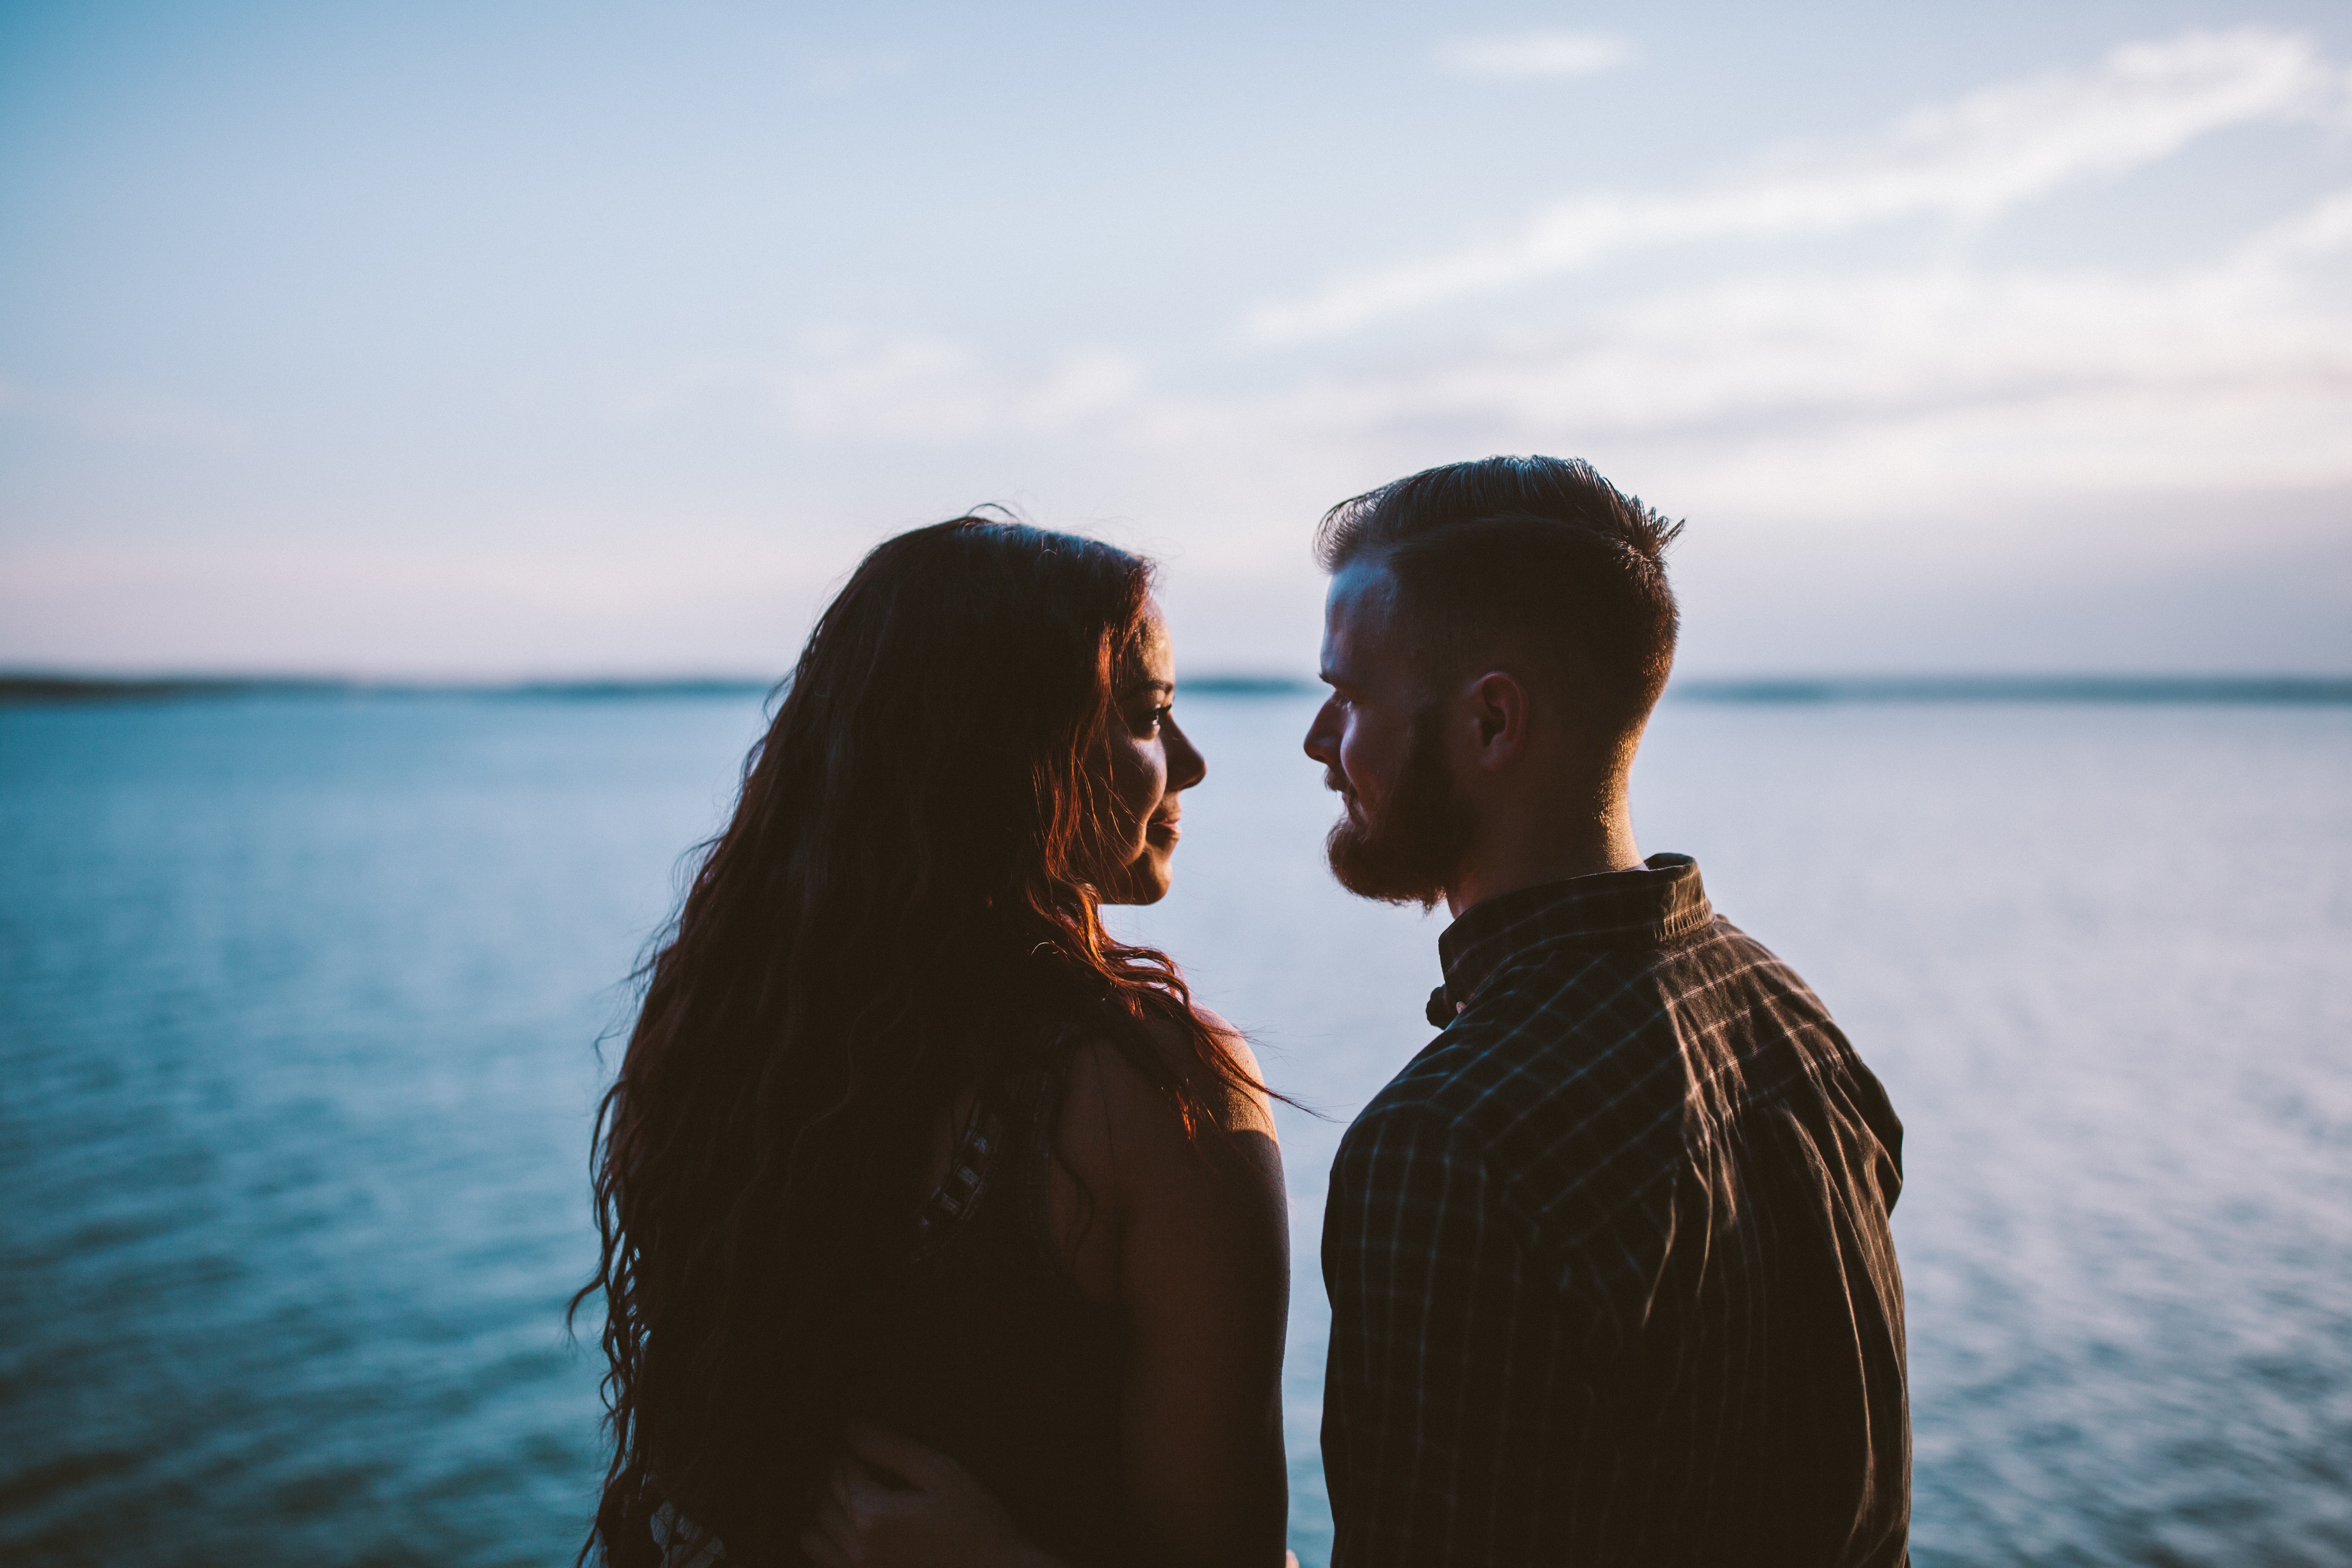 Lovers unable to take their eyes off each other | Source: Unsplash